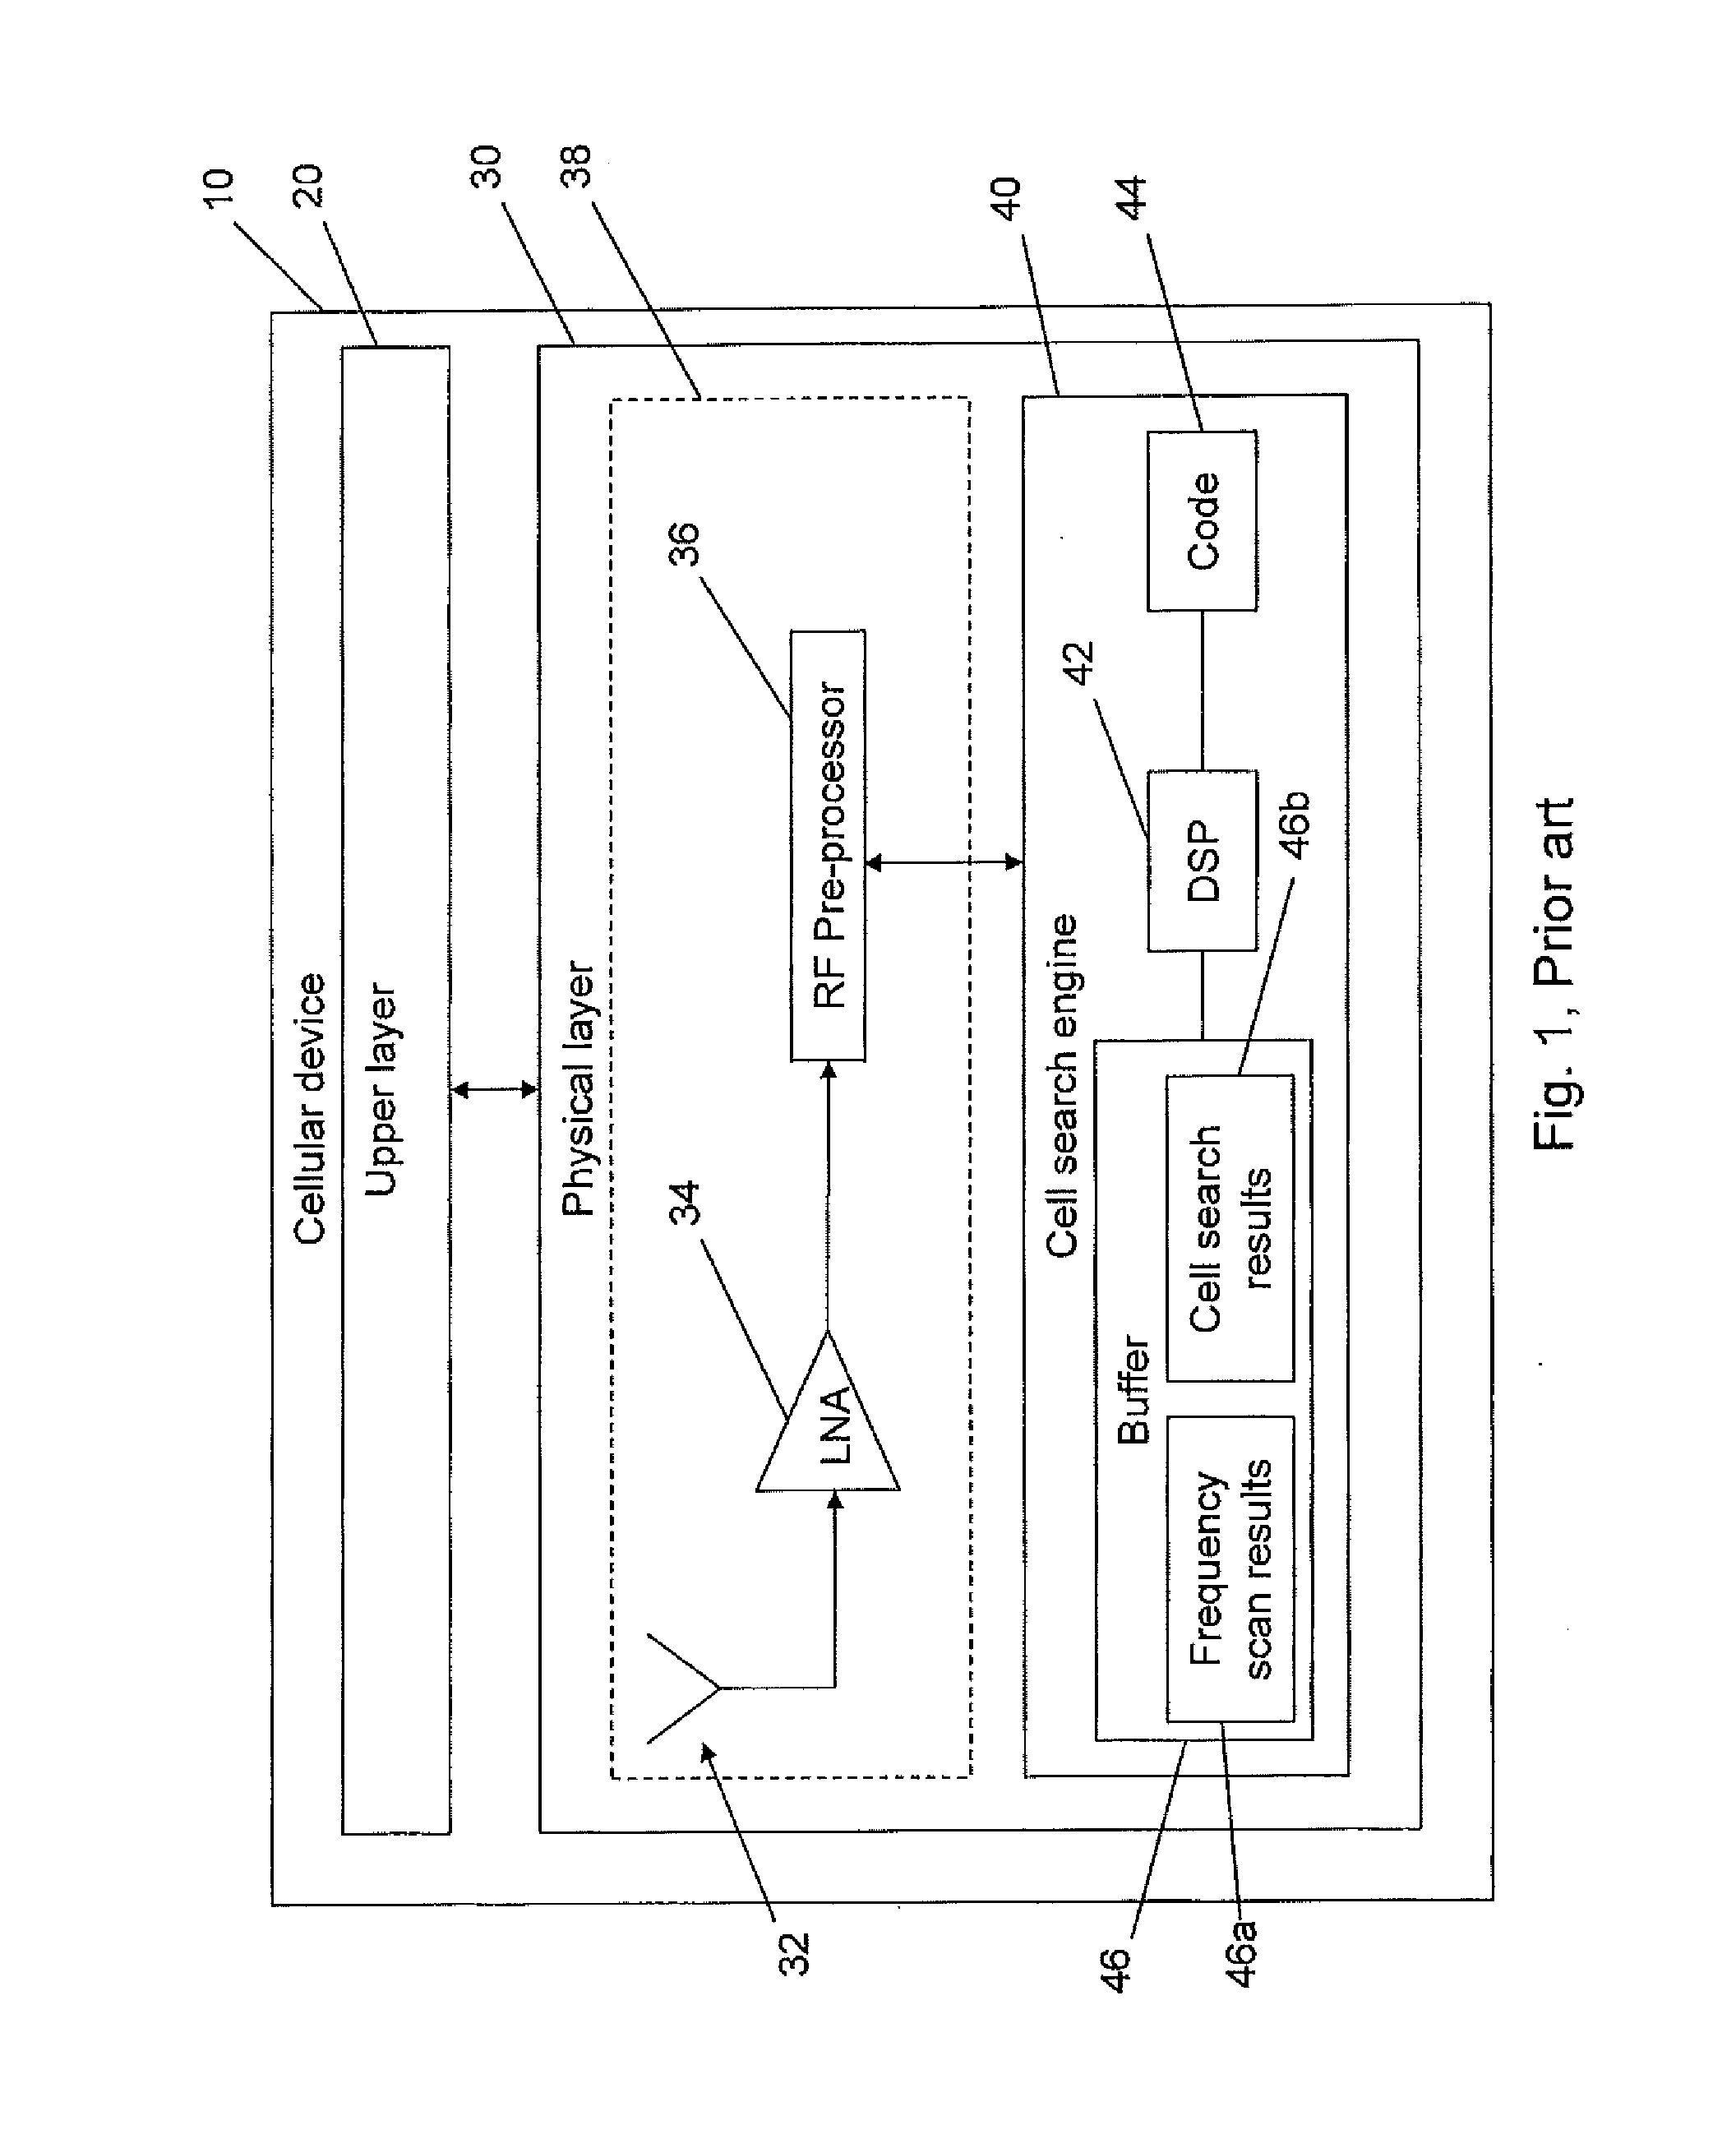 System and Method for Time Saving Cell Search for Mobile Devices in Single and Multiple Radio Technology Communication Systems